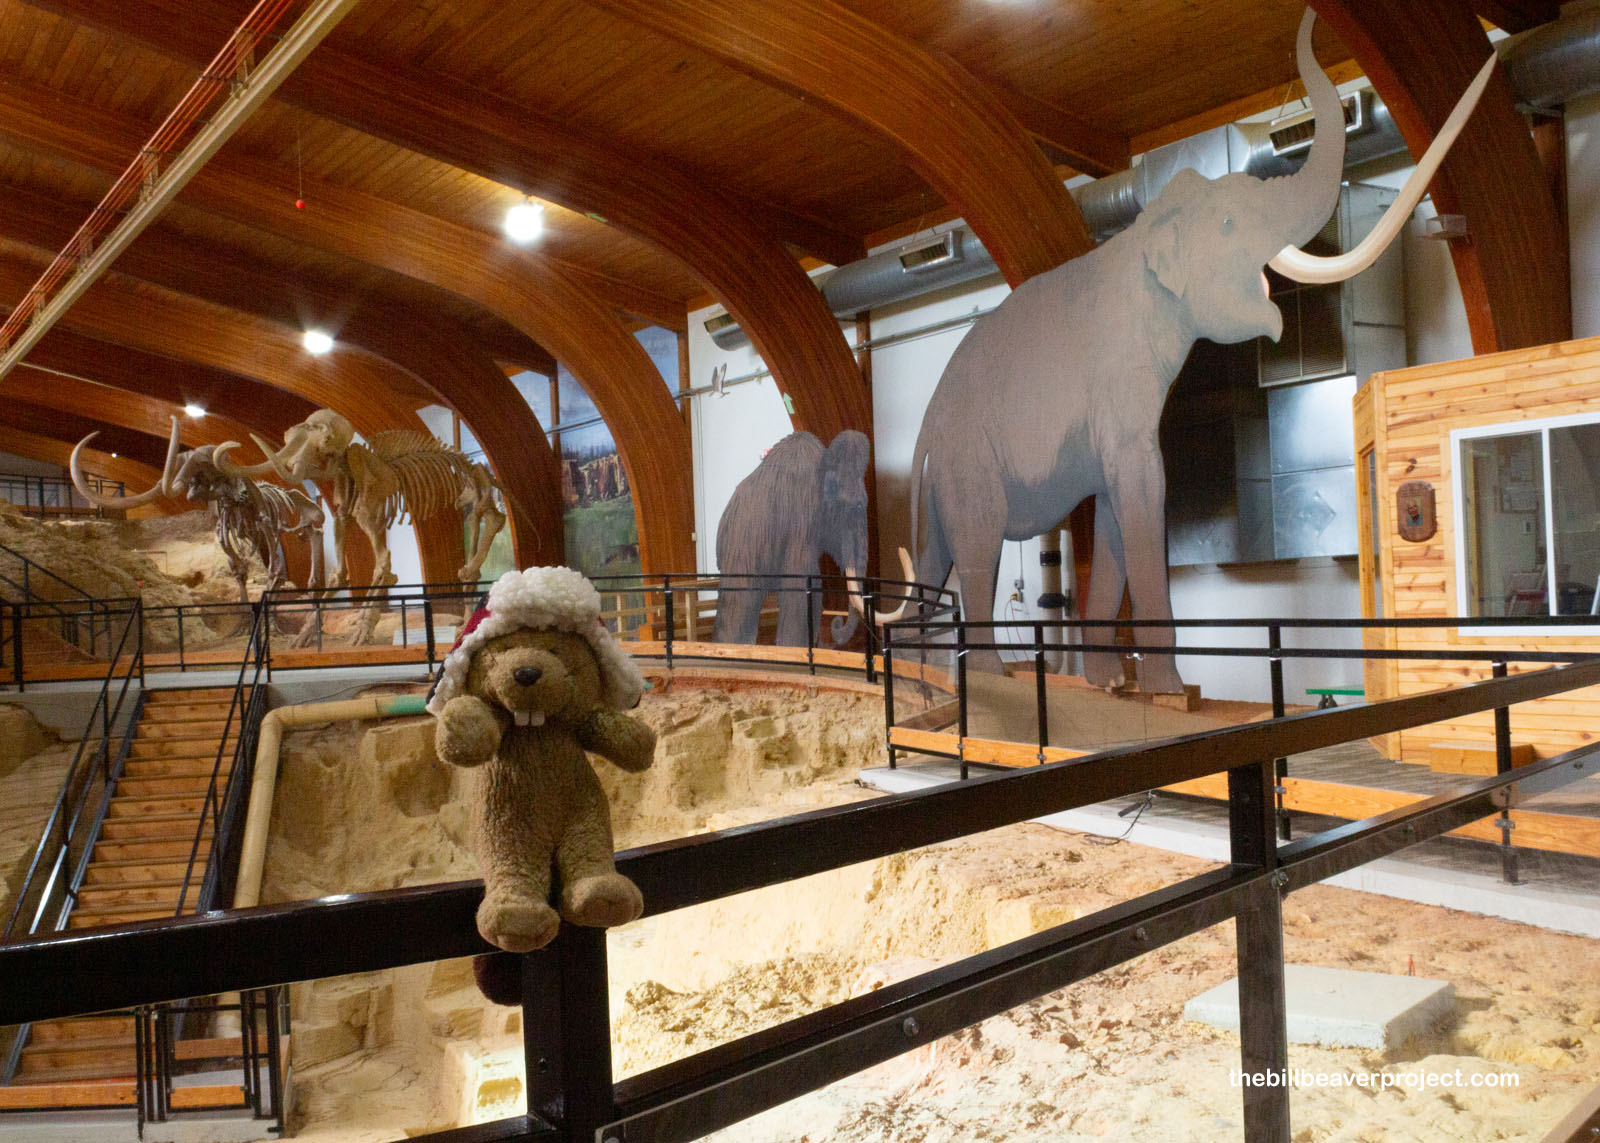 Some life-sized cutouts of different mammoth species!